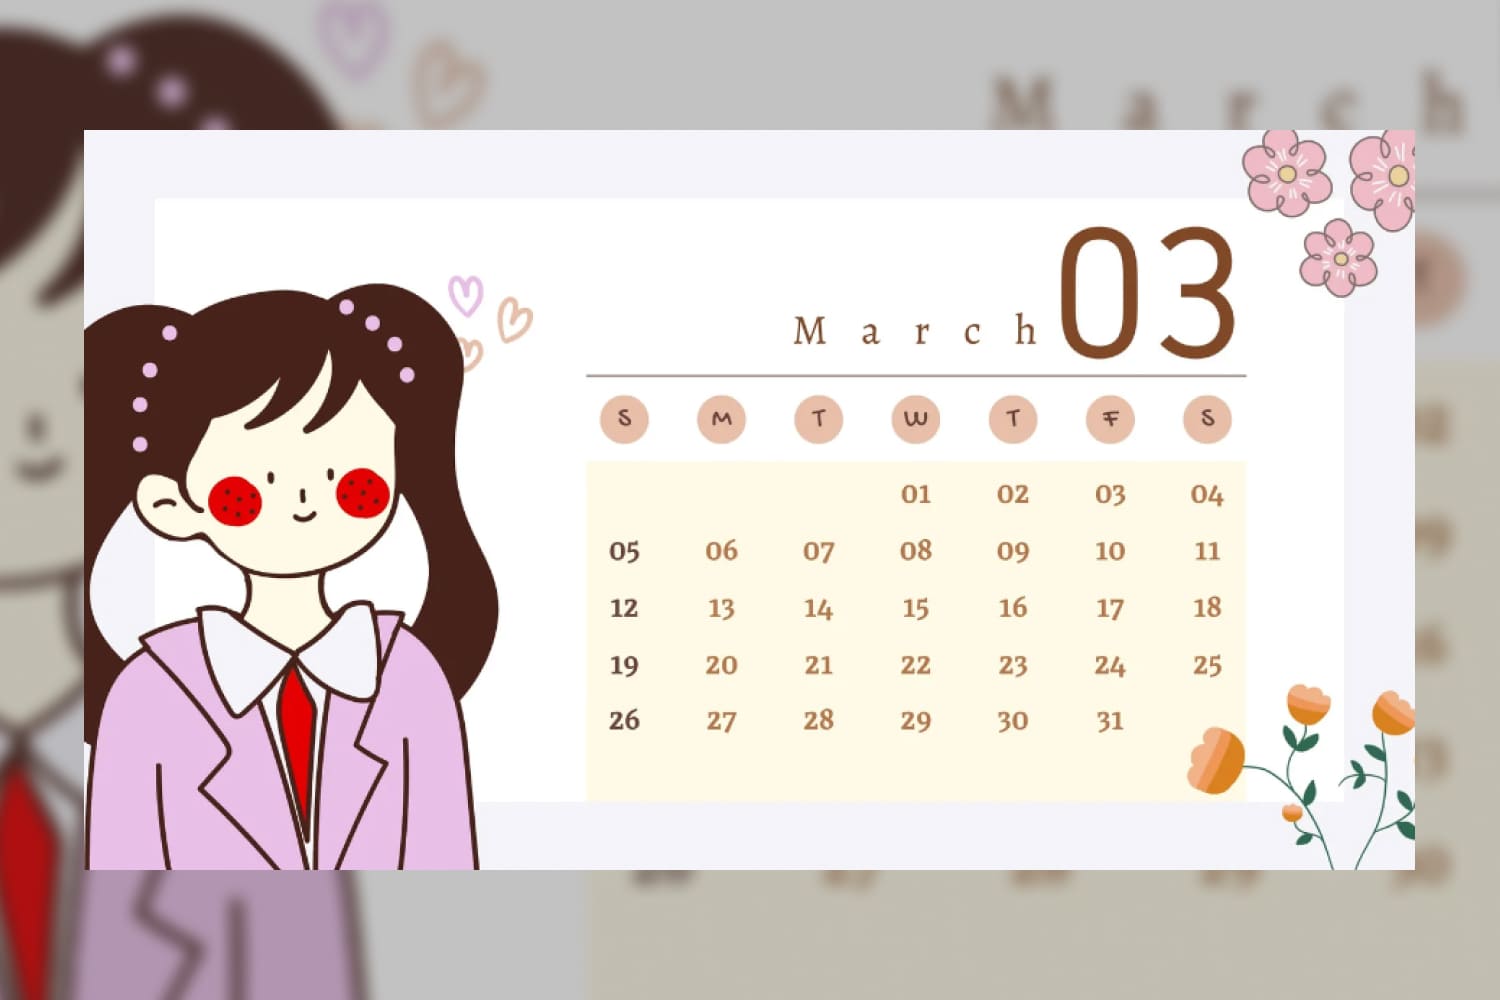 Calendar for March with a picture of a girl with pigtails and a pink jacket.